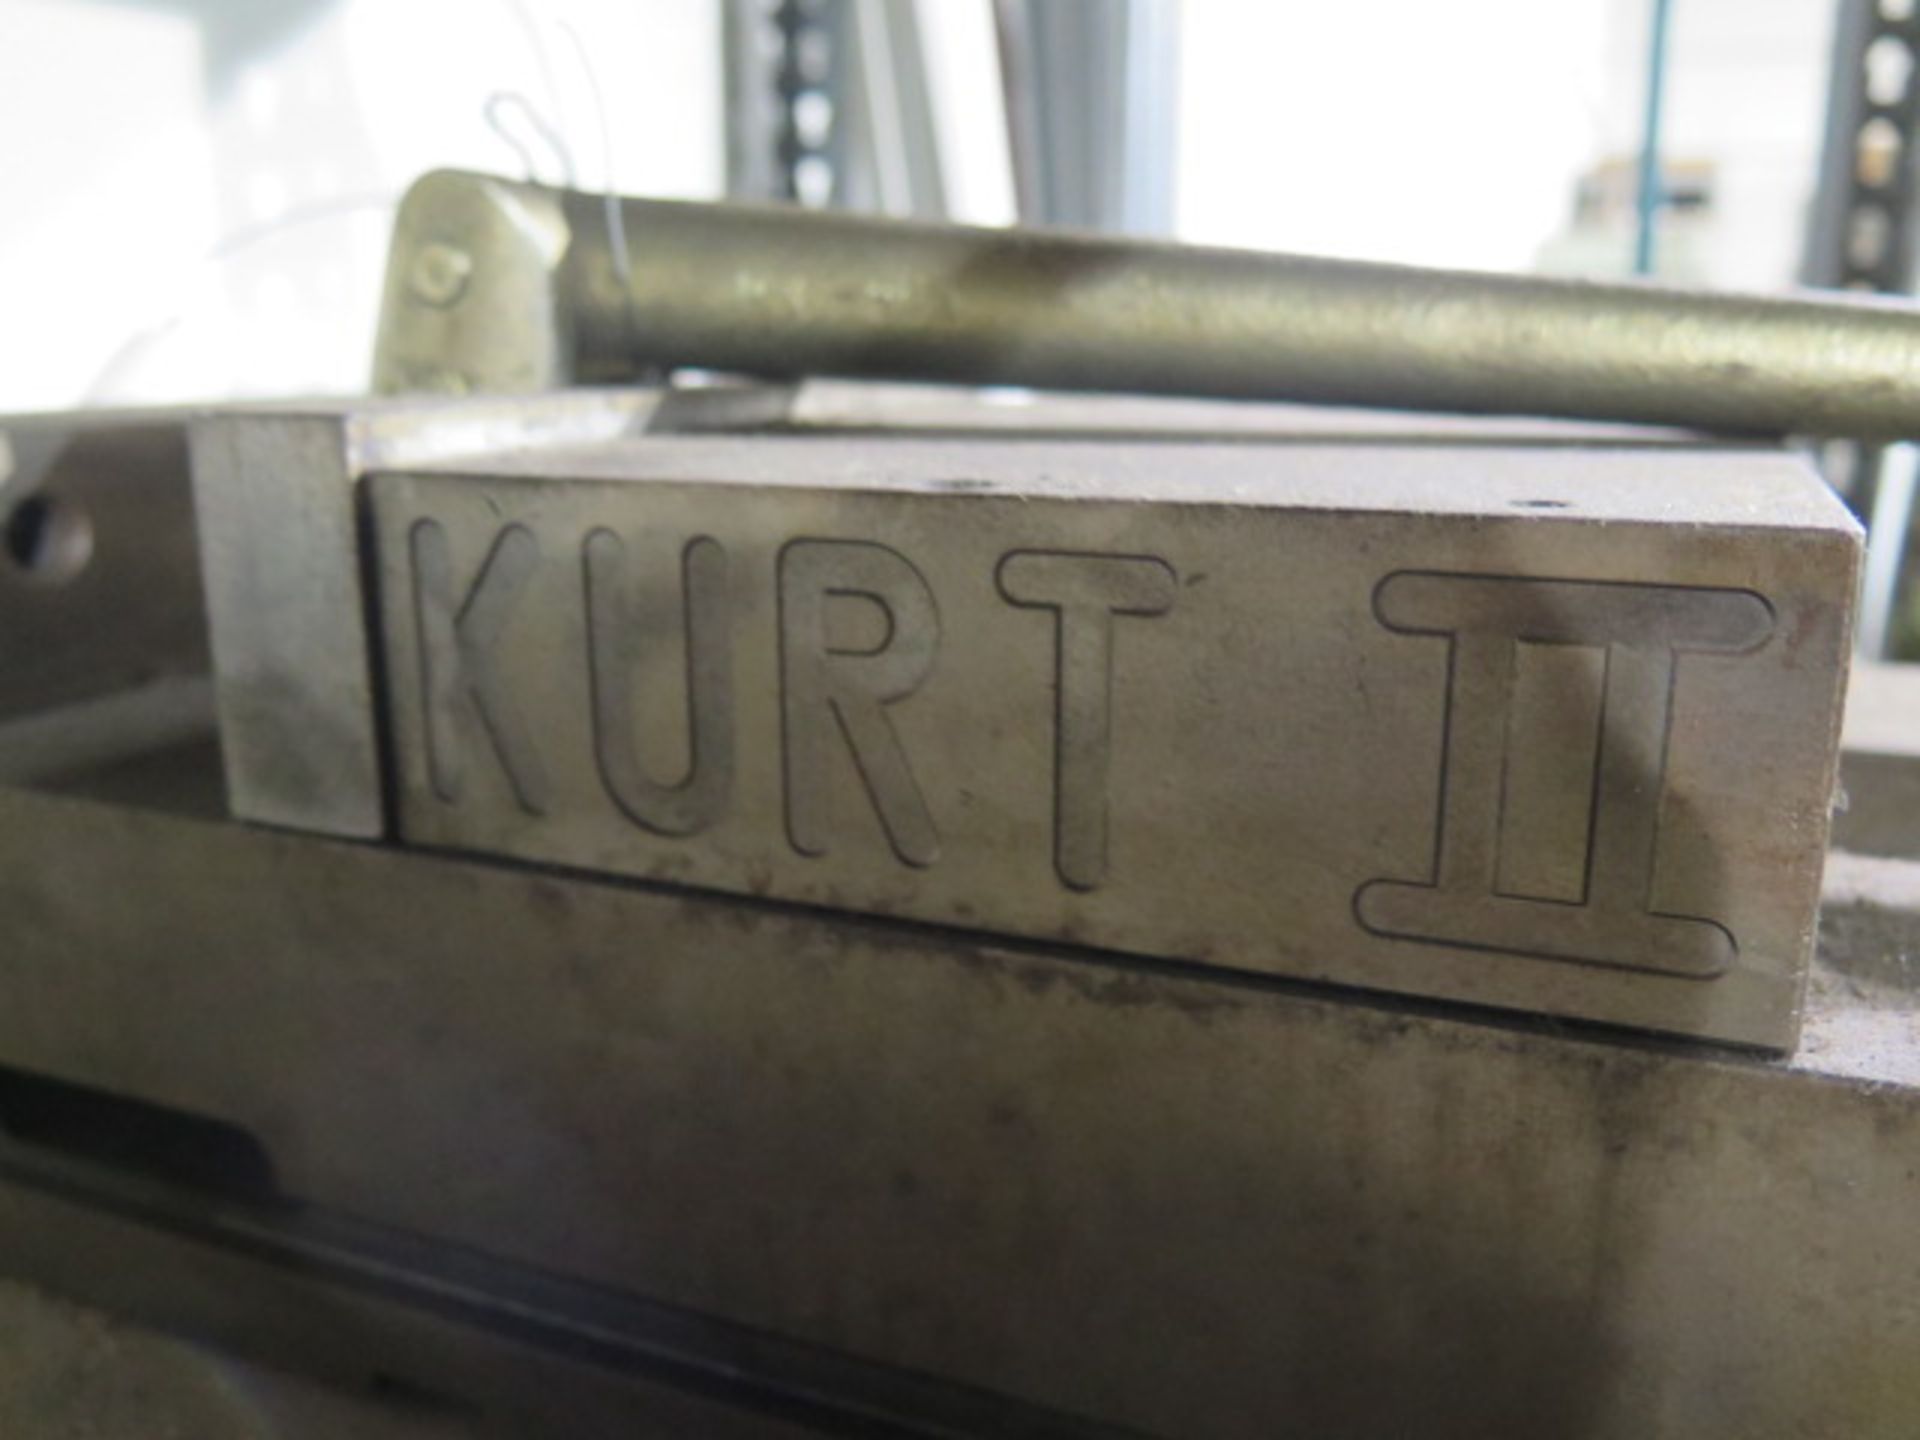 Kurt PT800A 8" Angle-Lock Vise (SOLD AS-IS - NO WARRANTY) - Image 3 of 3